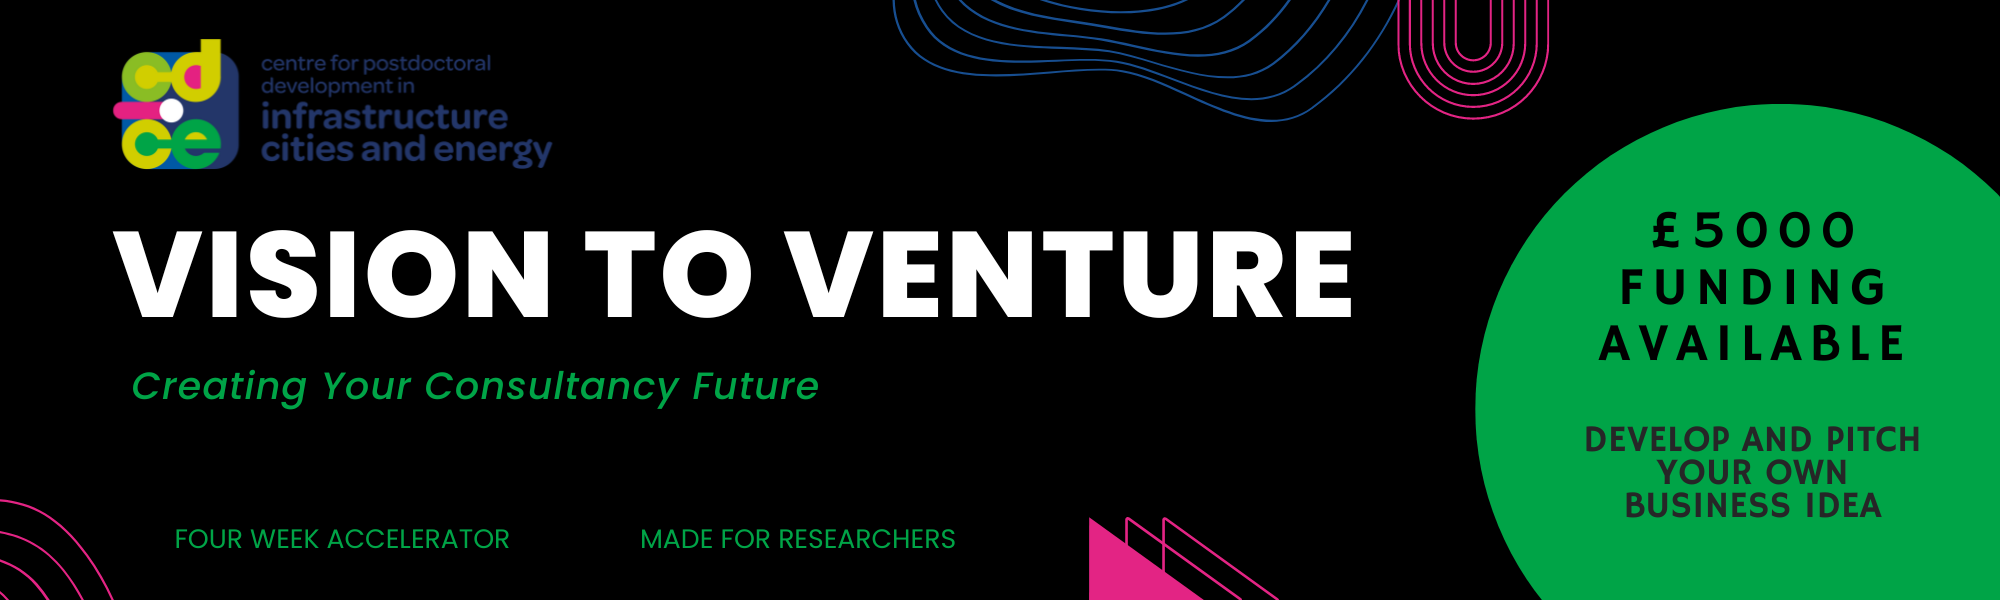 Vision To Venture: £5000 for researchers to start their own business!